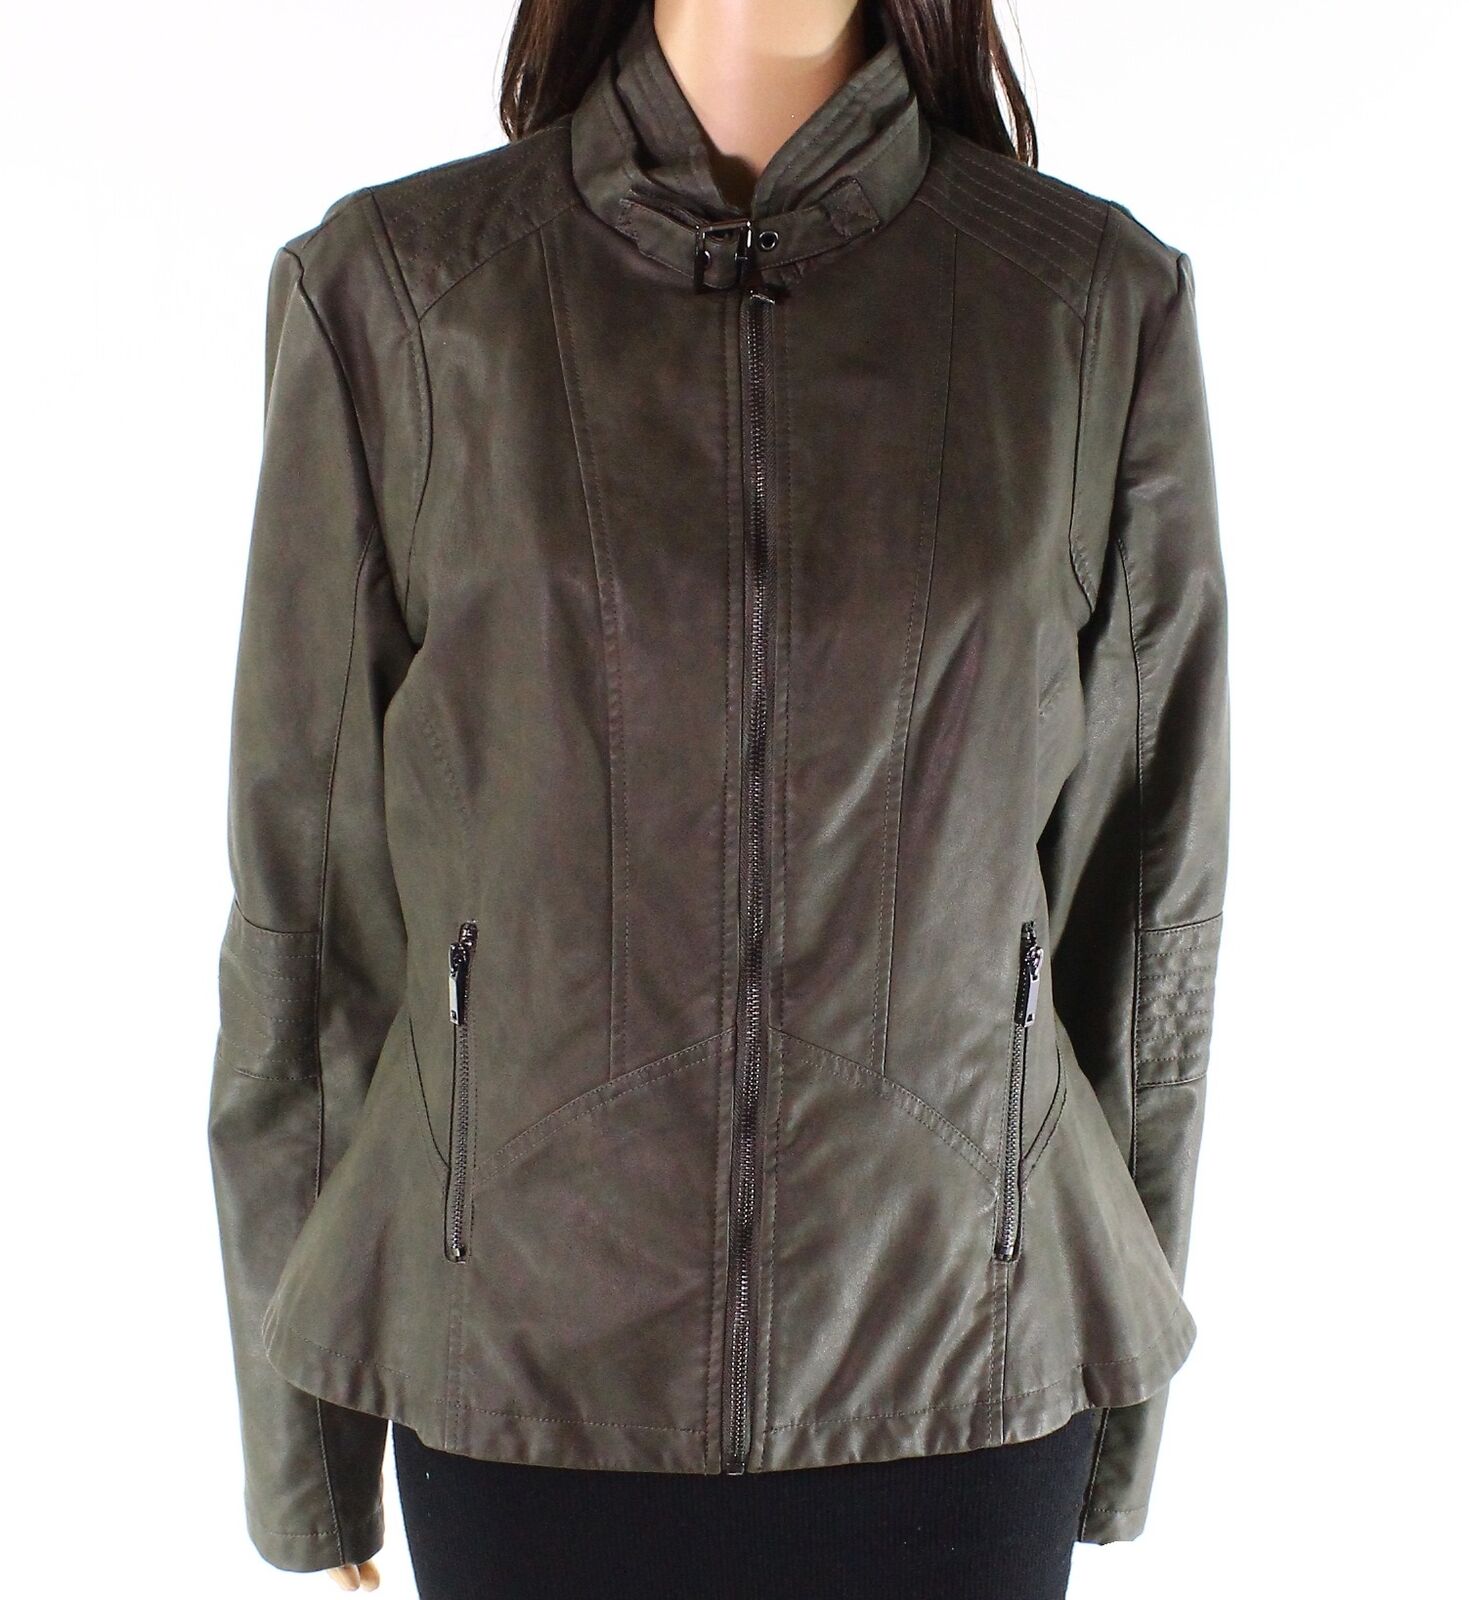 G Gallery Coats & Jackets - Womens Olive Jacket Faux-Leather Moto Full ...